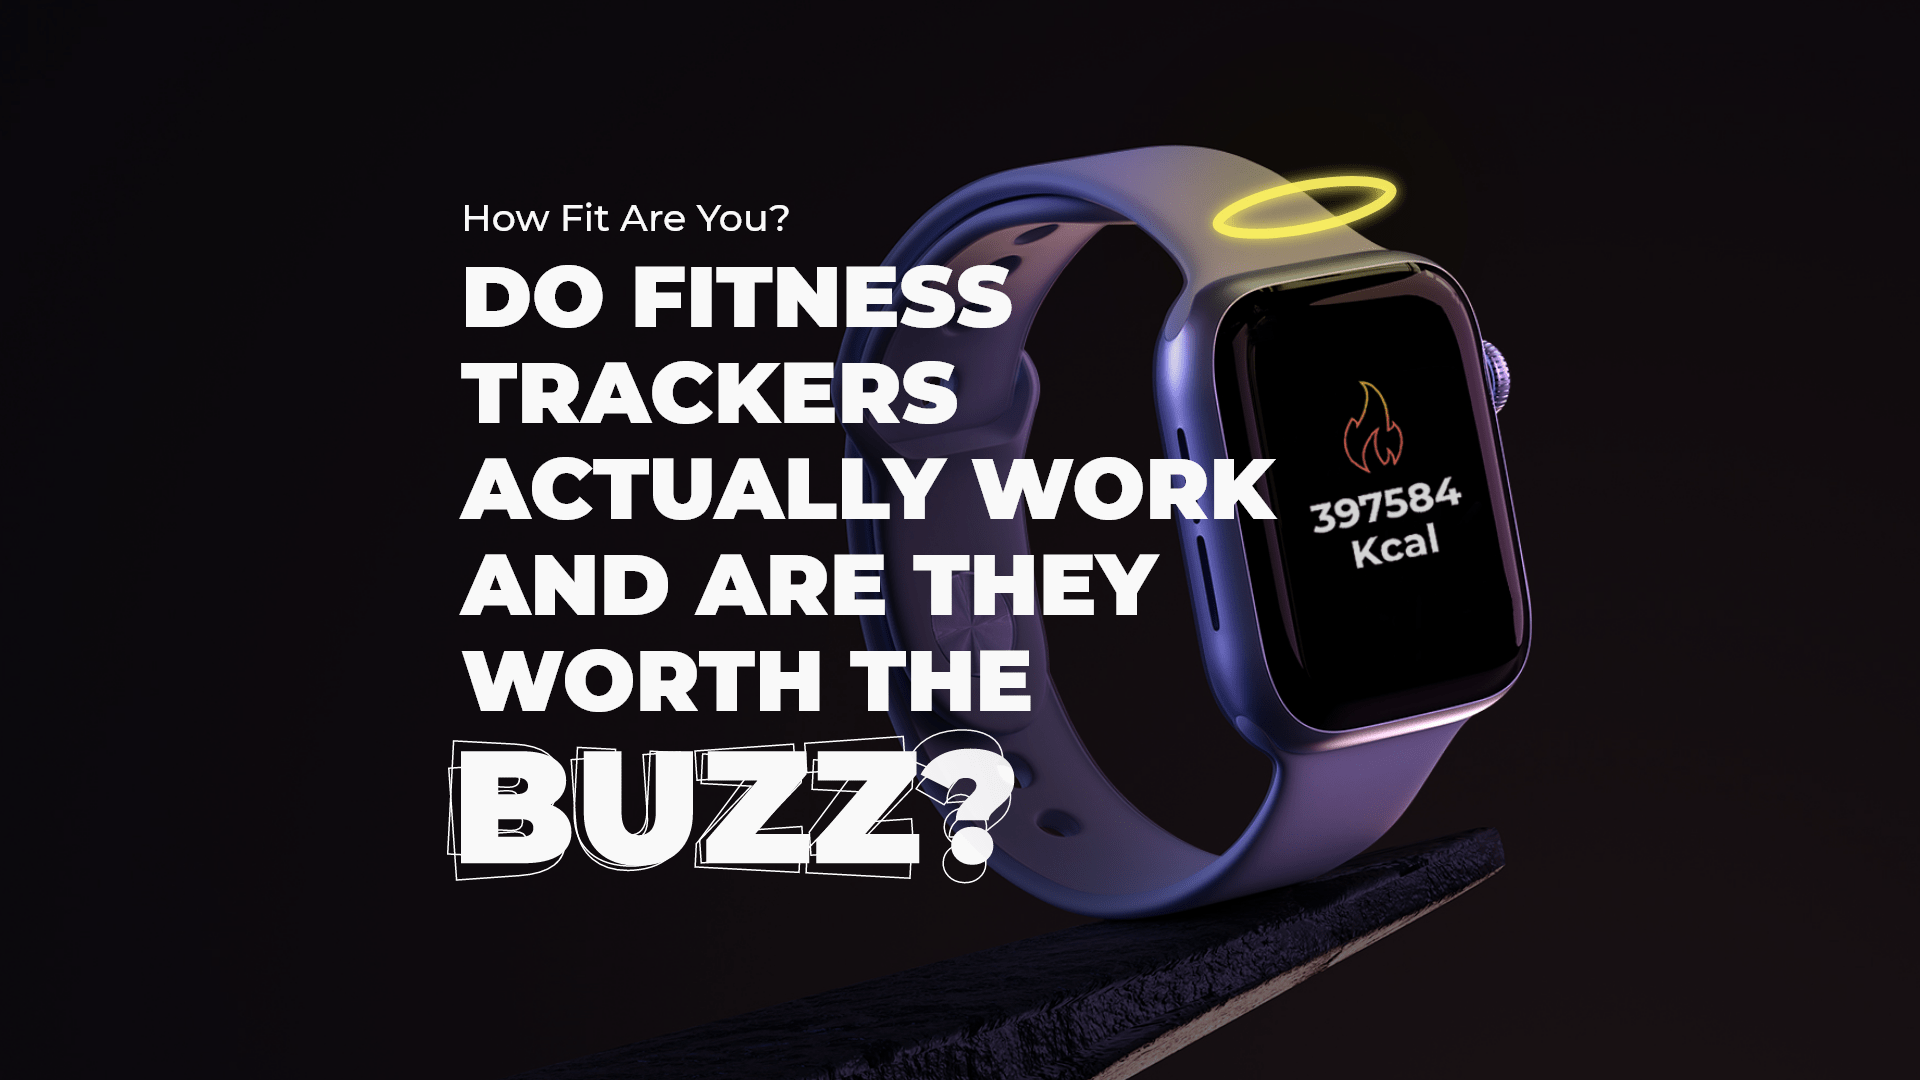 Do fitness trackers actually work and are they worth the buzz?